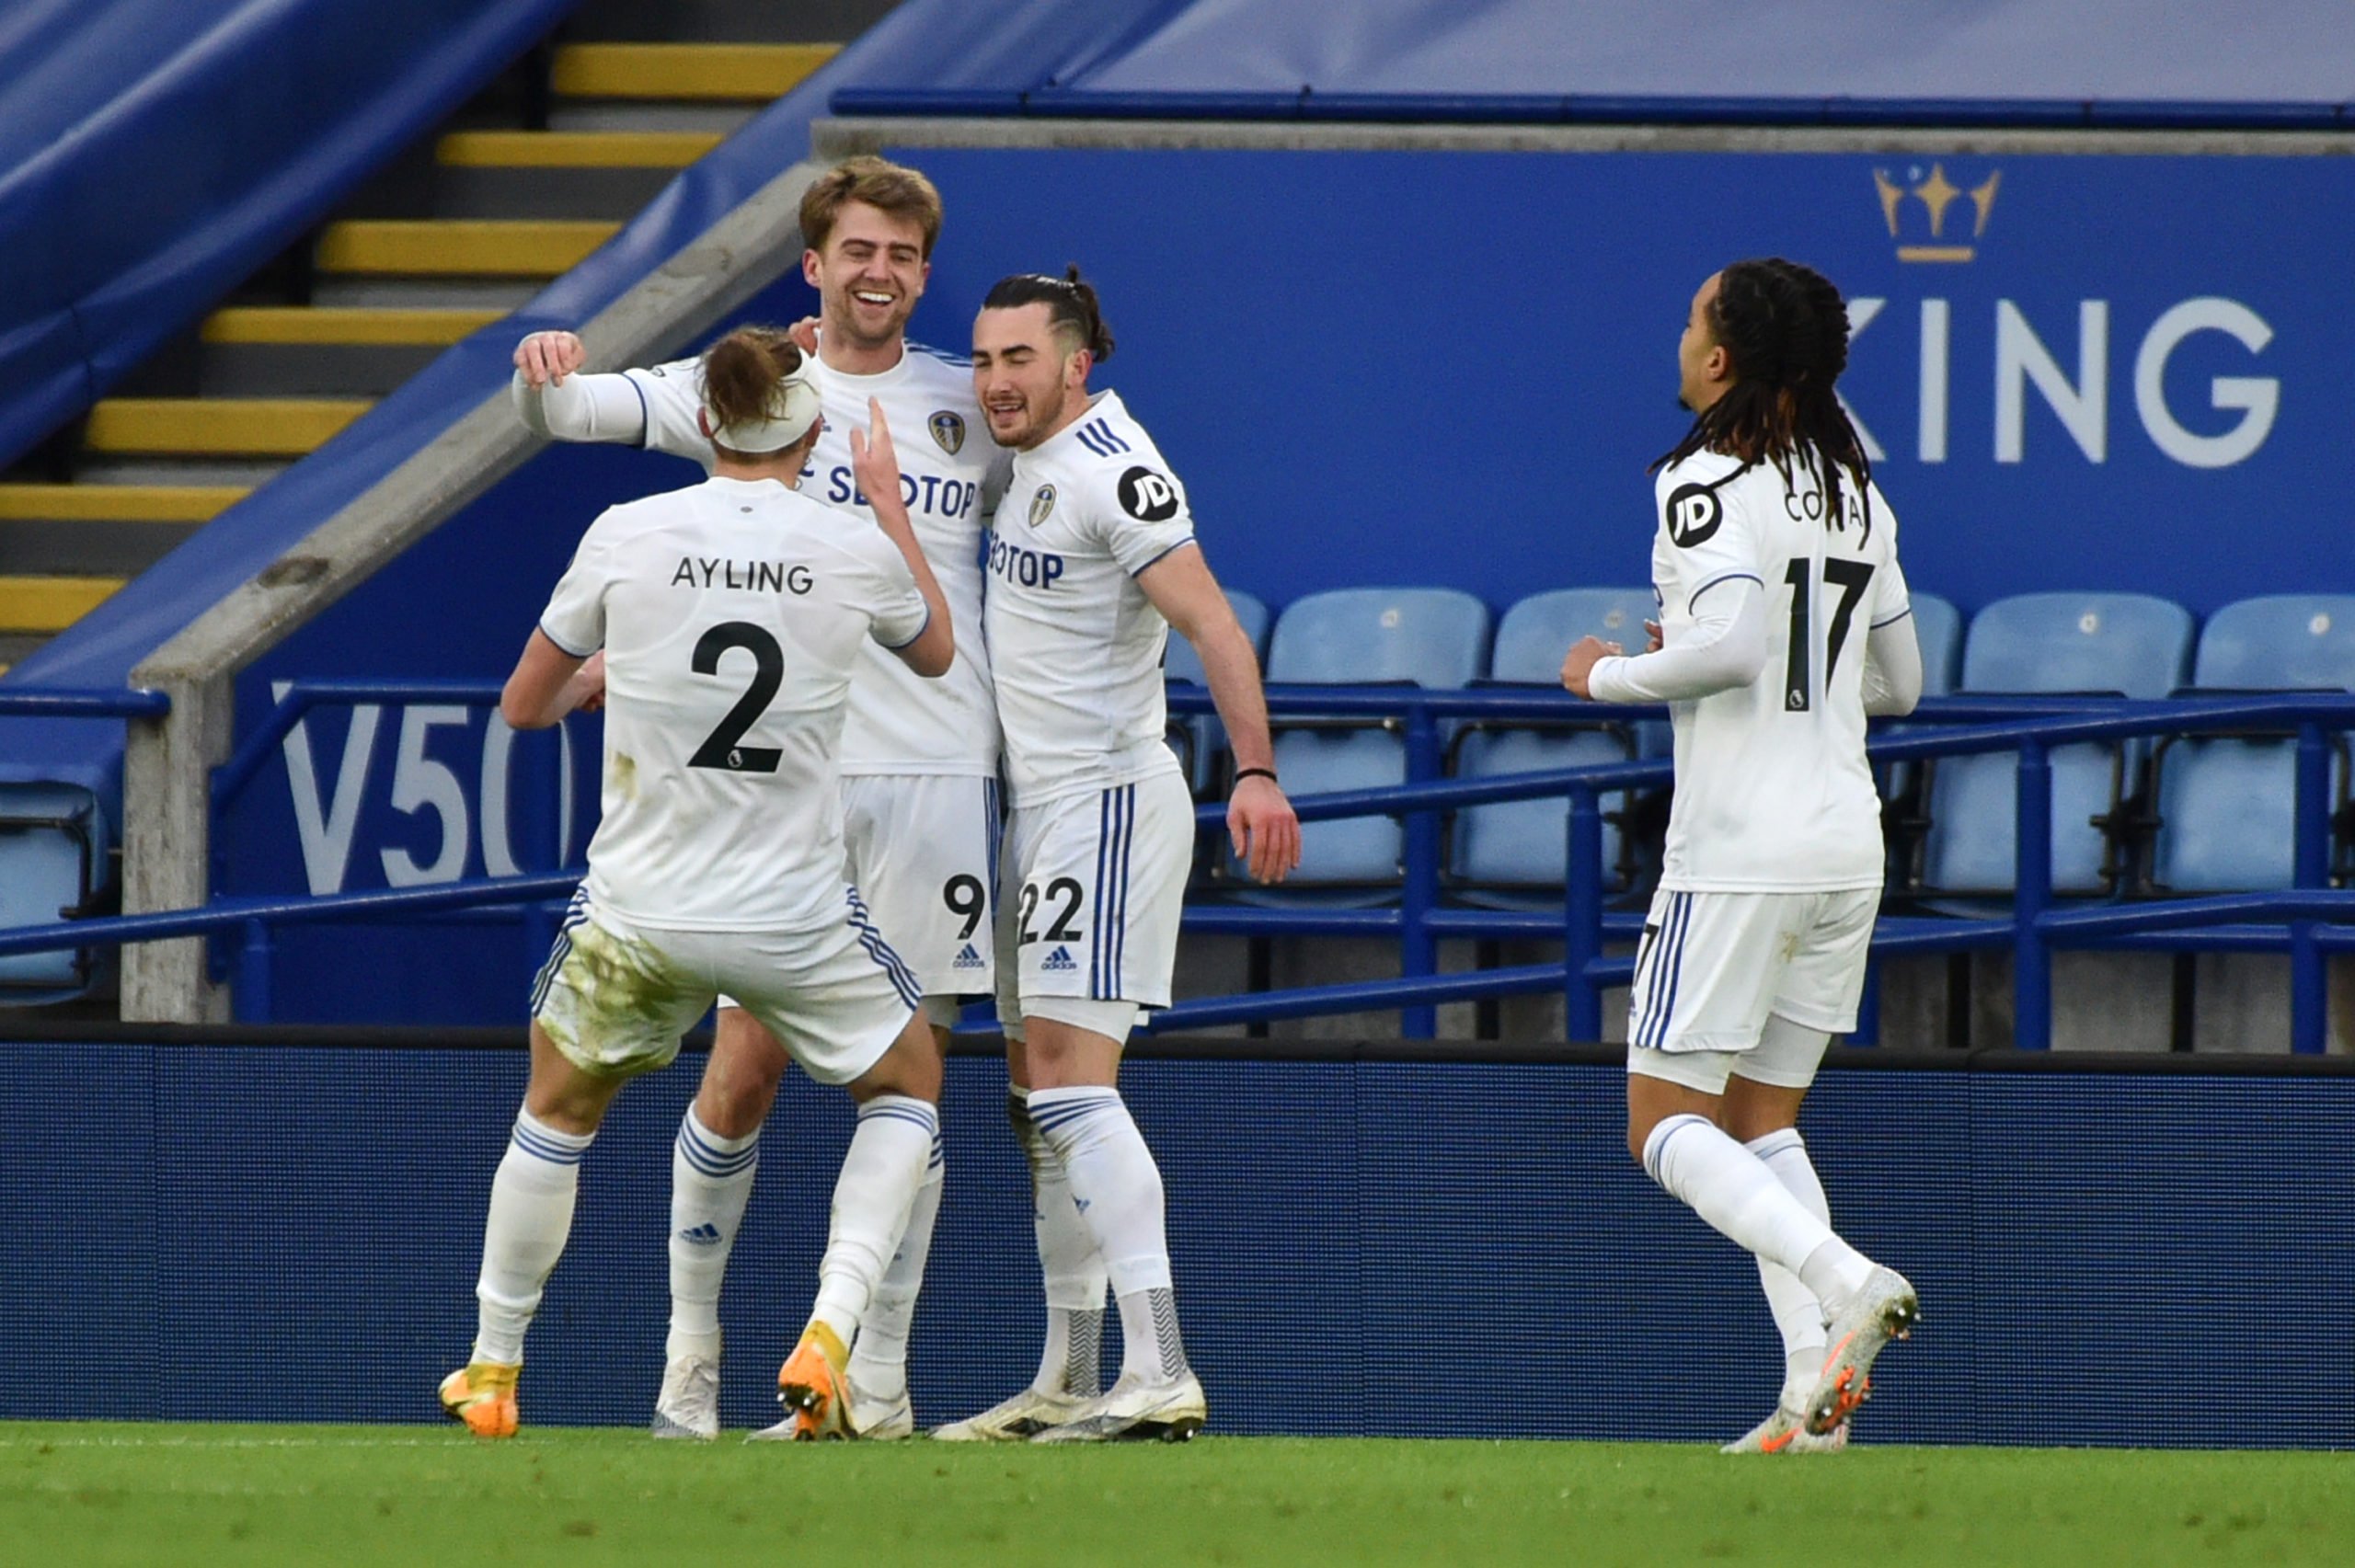 Jack Harrison of Leeds United celebrates with team mates (L - R) Luke Ayling, Patrick Bamford and Helder Costa after scoring their side's third goal during the Premier League match between Leicester City and Leeds United at The King Power Stadium on January 31, 2021 in Leicester, England. Sporting stadiums around the UK remain under strict restrictions due to the Coronavirus Pandemic as Government social distancing laws prohibit fans inside venues resulting in games being played behind closed doors. (Photo by Rui Vieira - Pool/Getty Images)